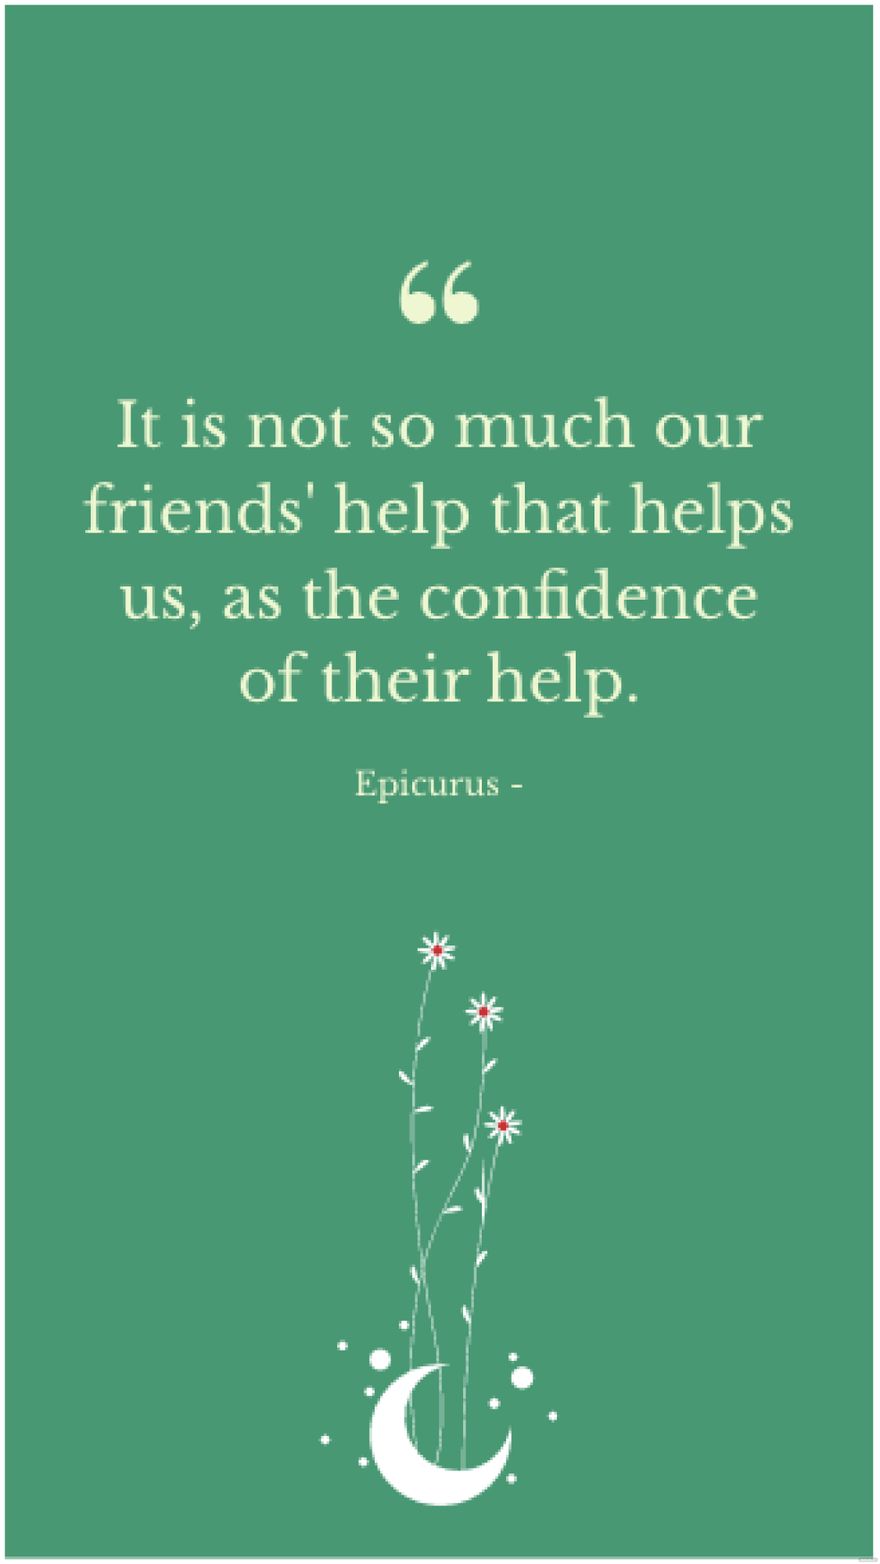 Epicurus - It is not so much our friends' help that helps us, as the confidence of their help.